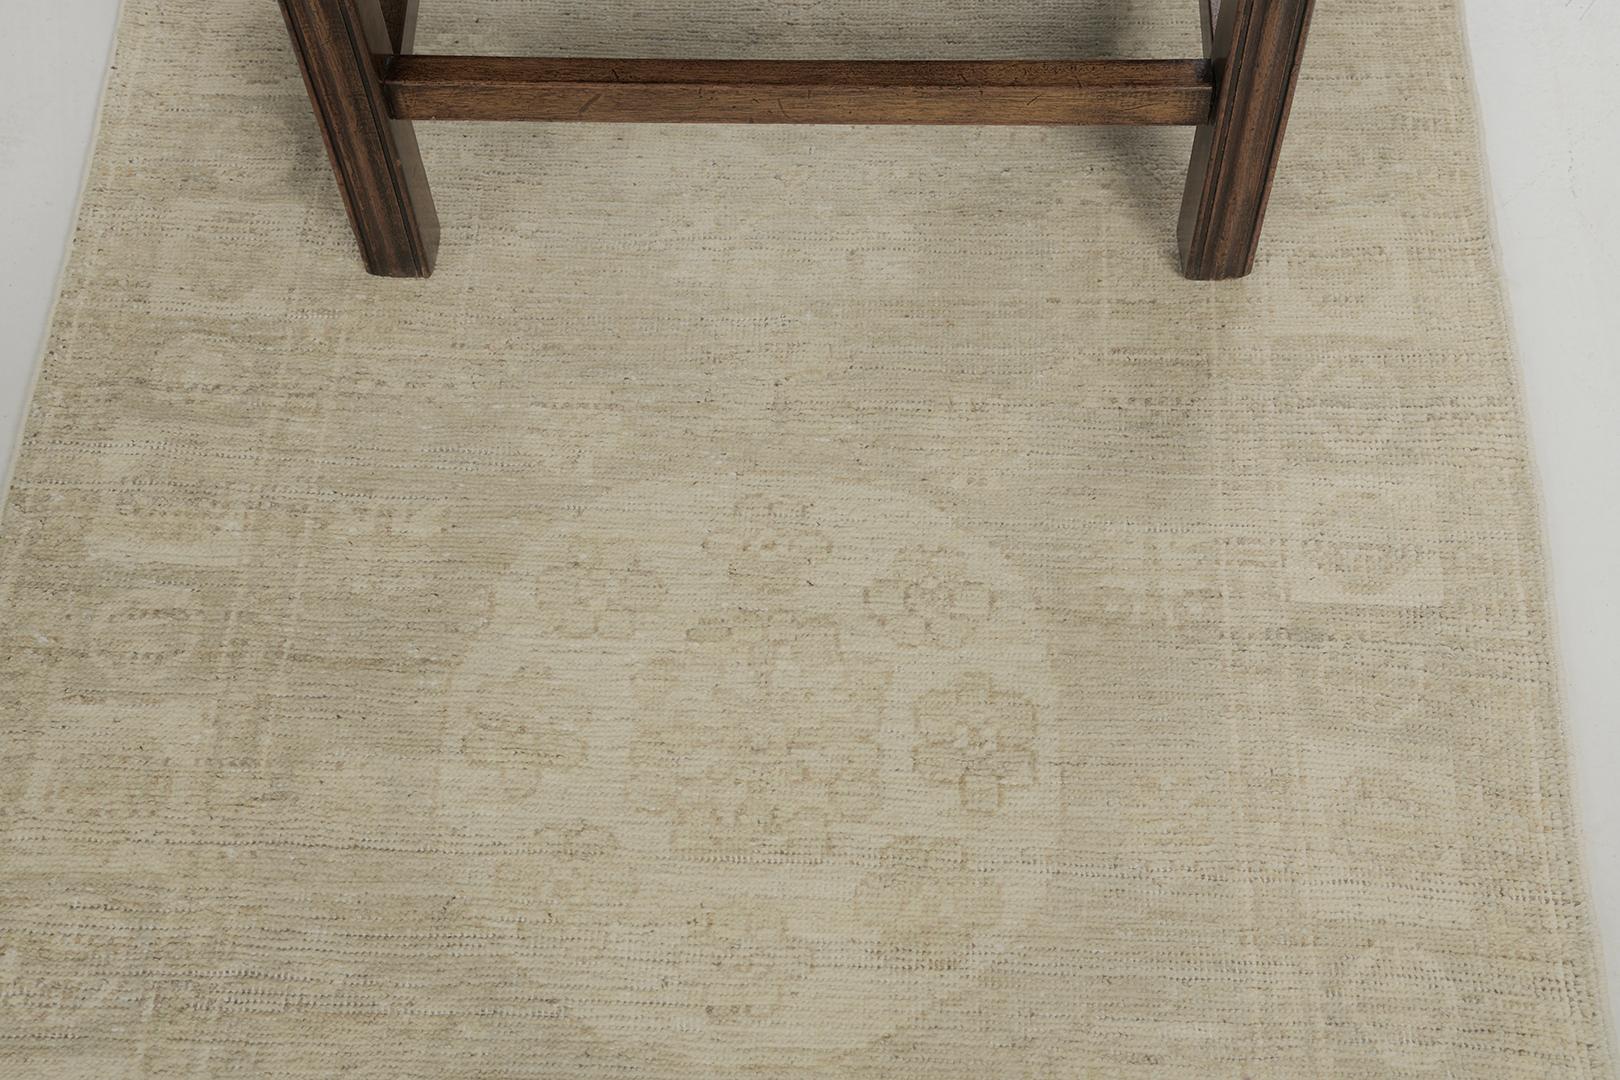 This stunning masterpiece of our Safira Collection lets your heart desire the comfortability of muted tones in the natural field of this rug. The main borders are patterned, aligned, and well-coordinated with gorgeous motifs. Three grandiose